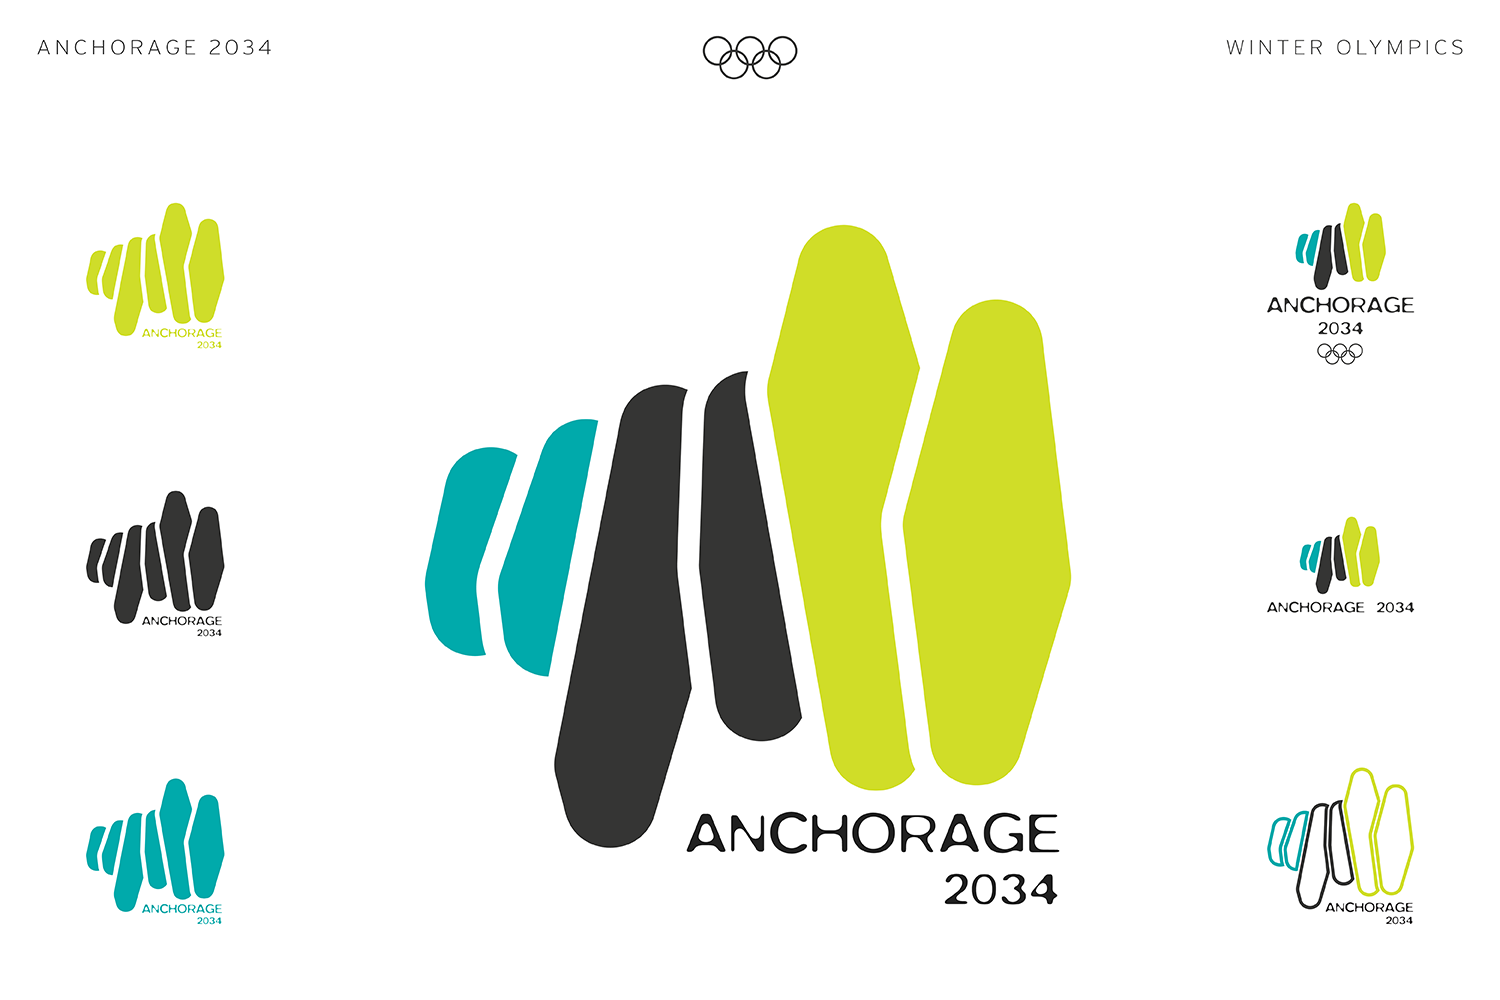 assets/uploads/entries/2022-6415_50flux_anchorage_olympics_01.png